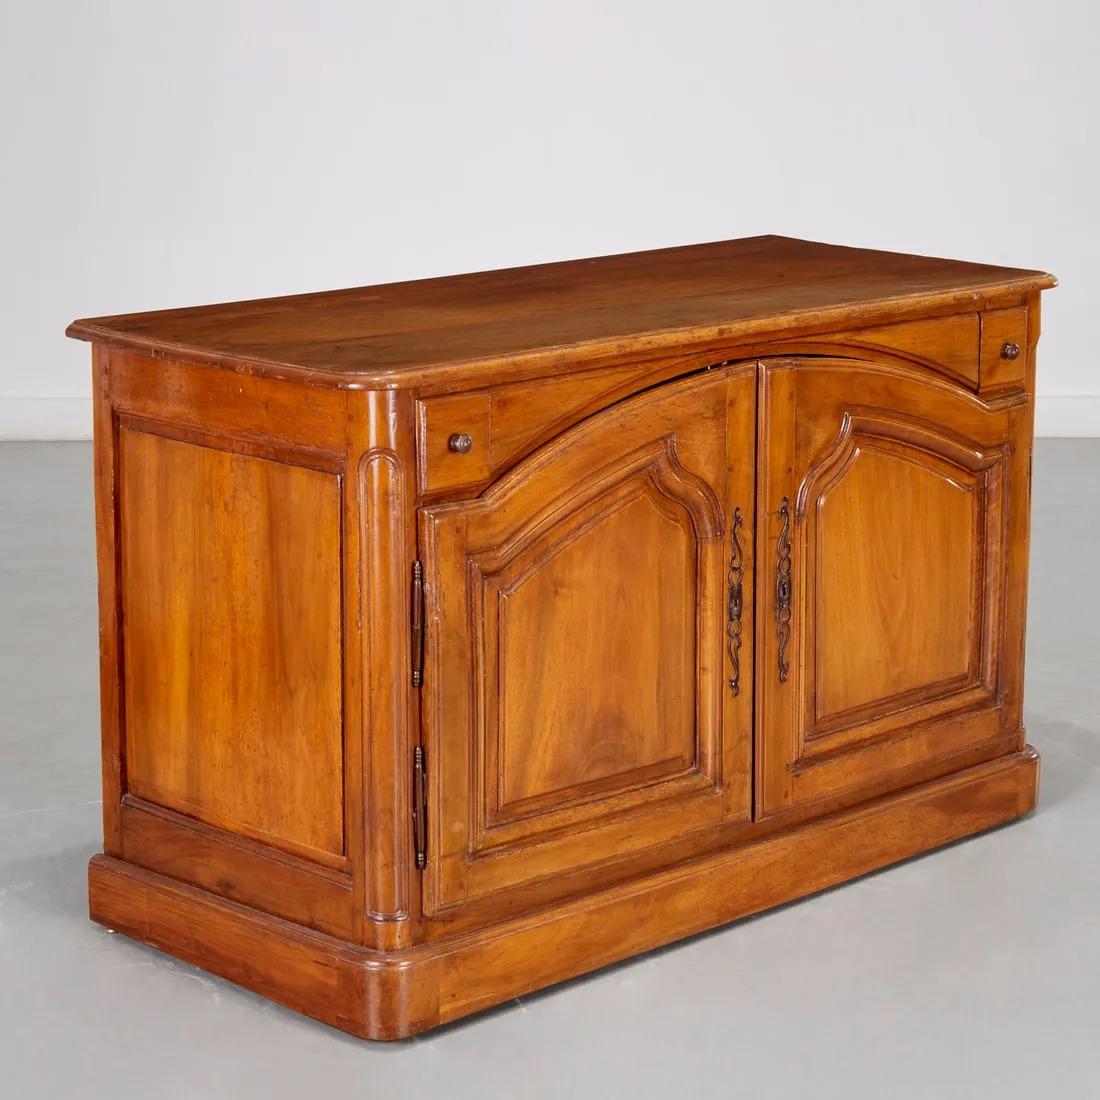 A French Country Buffet de Chasse in blonde walnut, mid-late 18th century, the rectangular wood top with rounded corners, over 2 small frieze drawers and 2 arched paneled doors, concealing a recent group of interior drawers, all in a plinth base.  